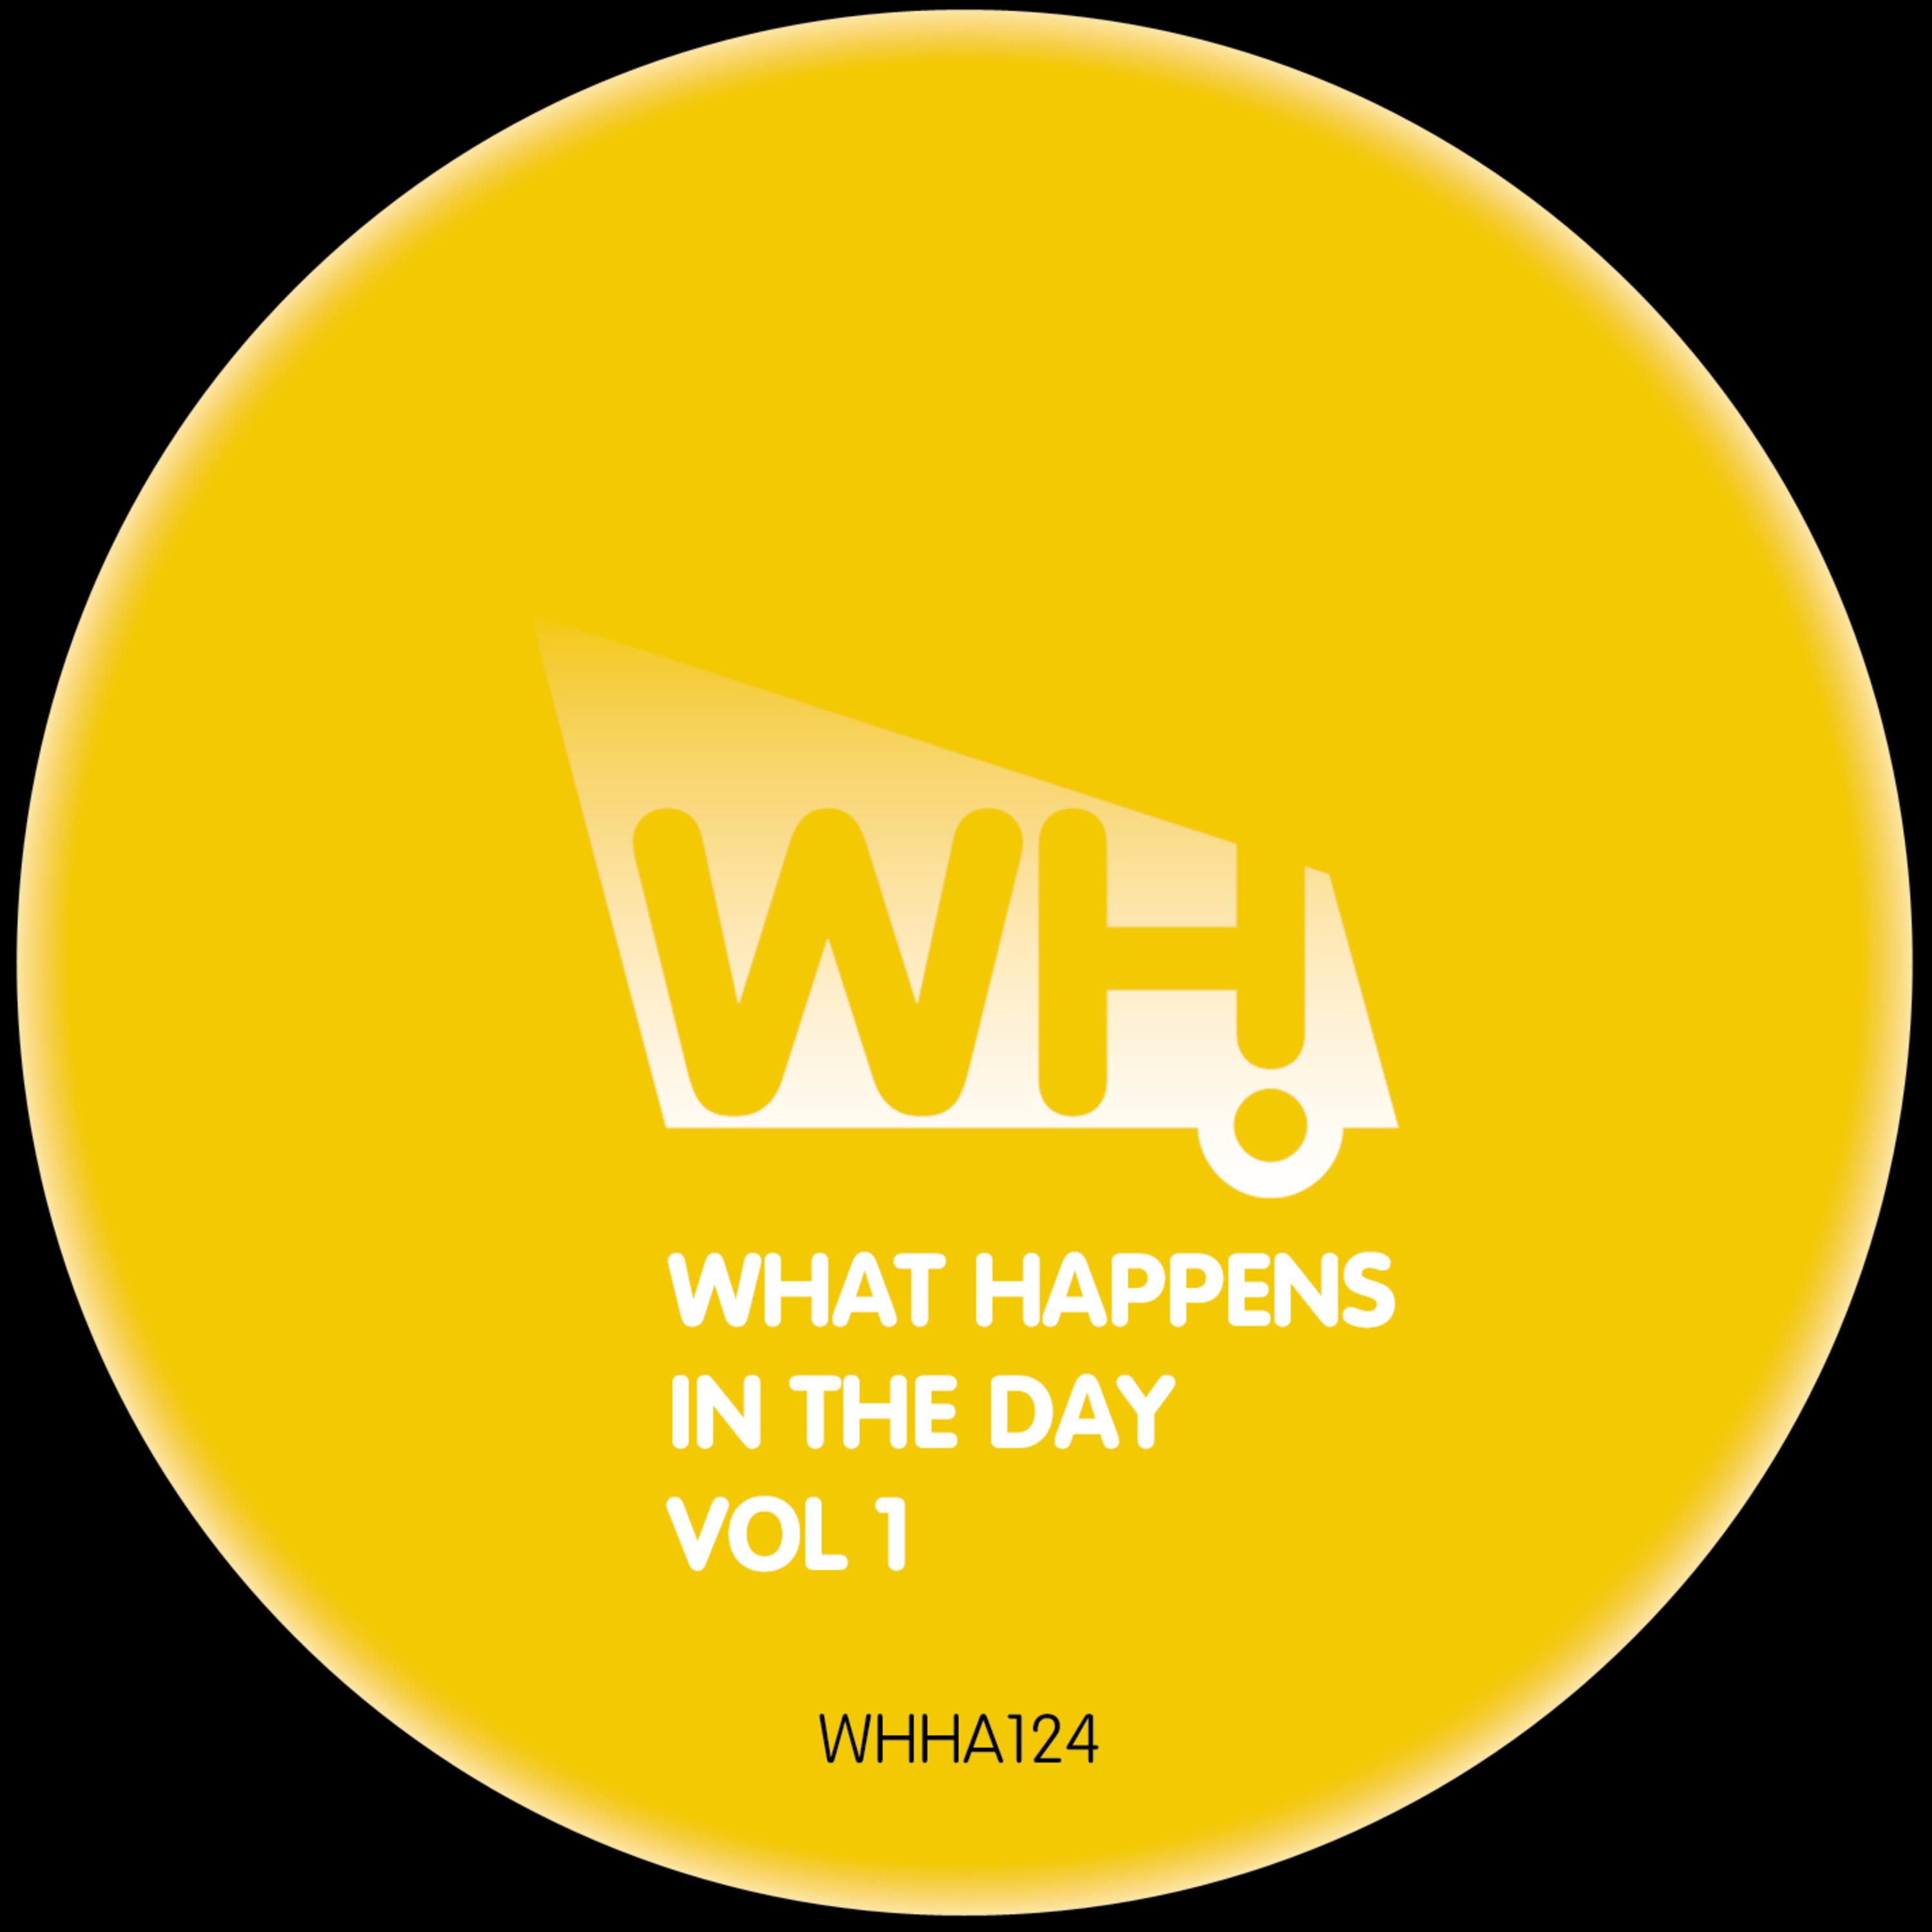 What Happens in the Day Vol 1